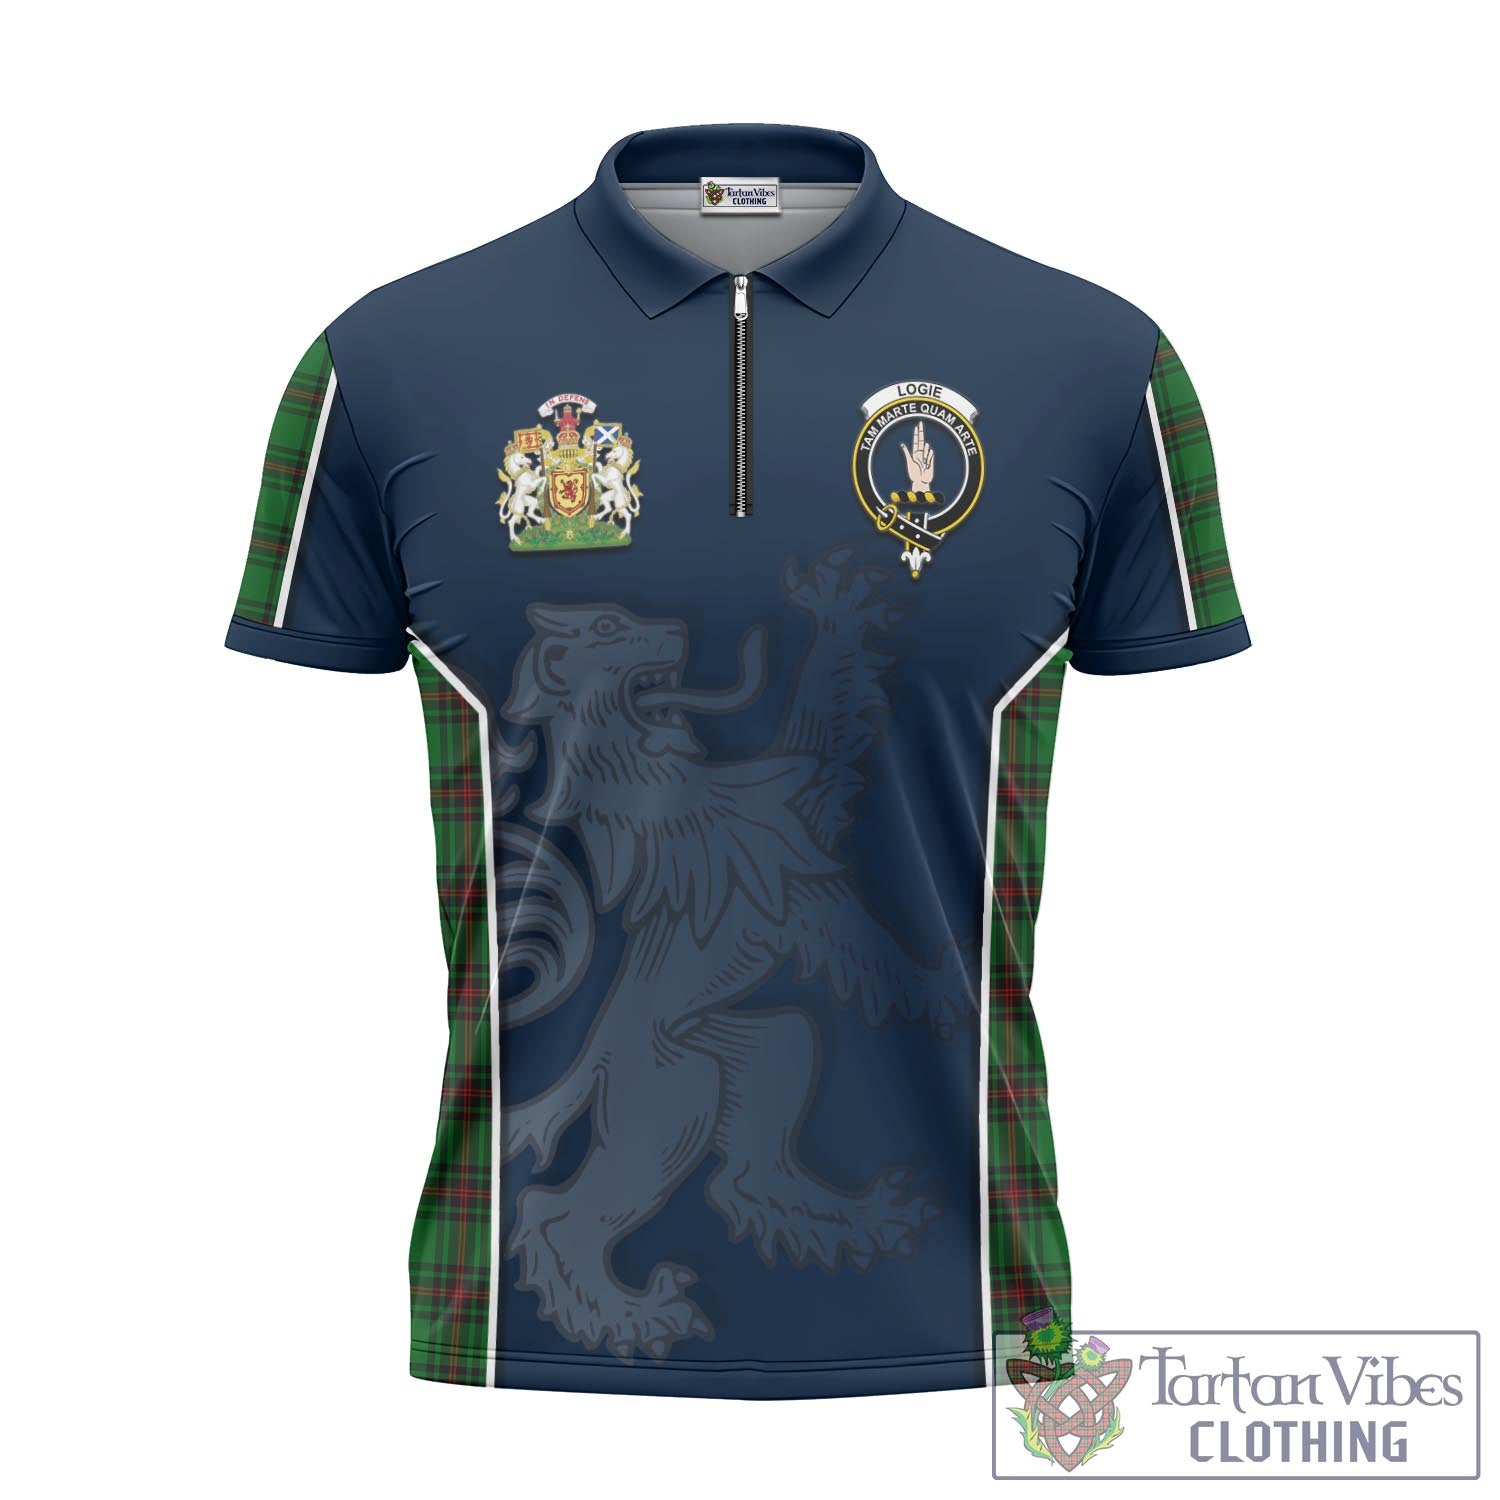 Tartan Vibes Clothing Logie Tartan Zipper Polo Shirt with Family Crest and Lion Rampant Vibes Sport Style